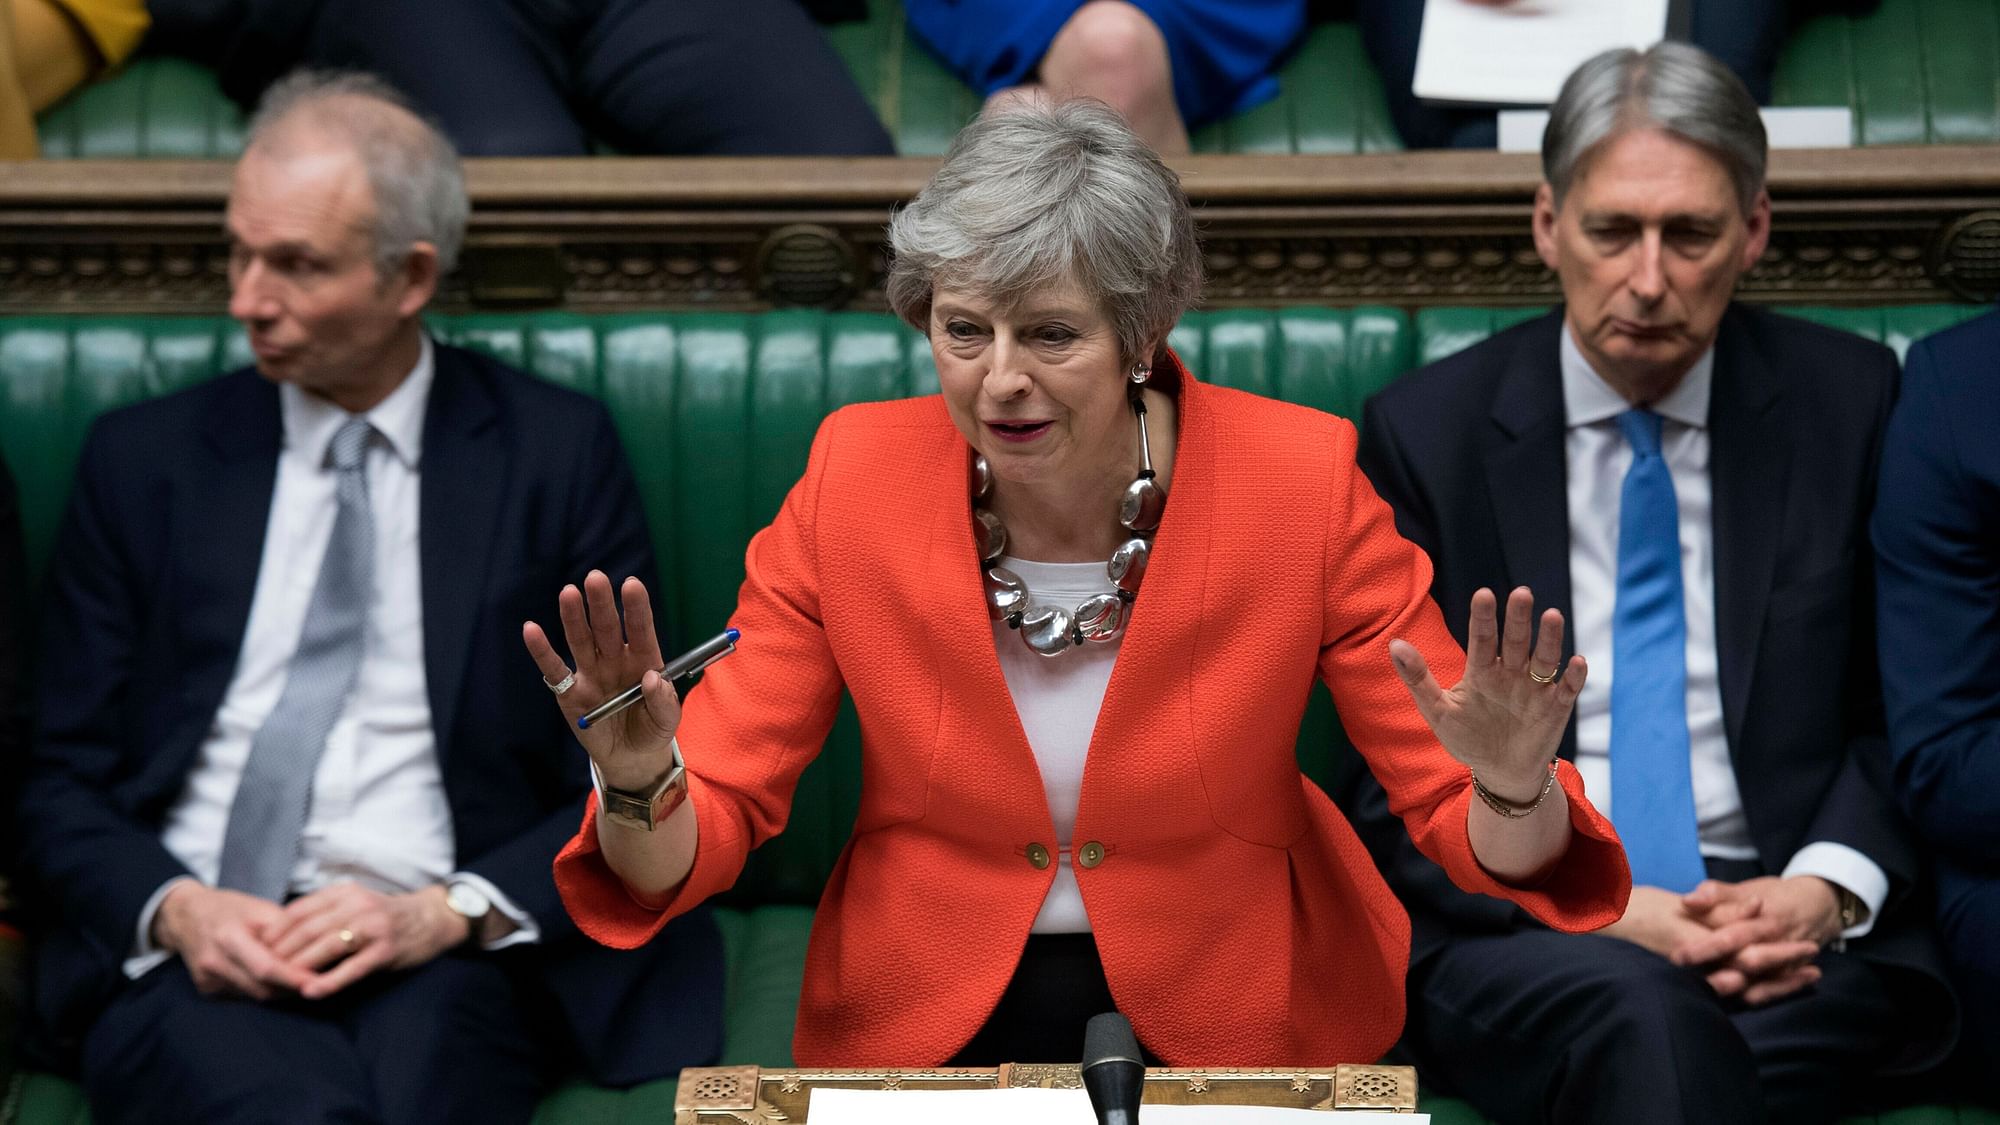 A file photo of British Prime Minister Theresa May speaking to lawmakers in parliament.